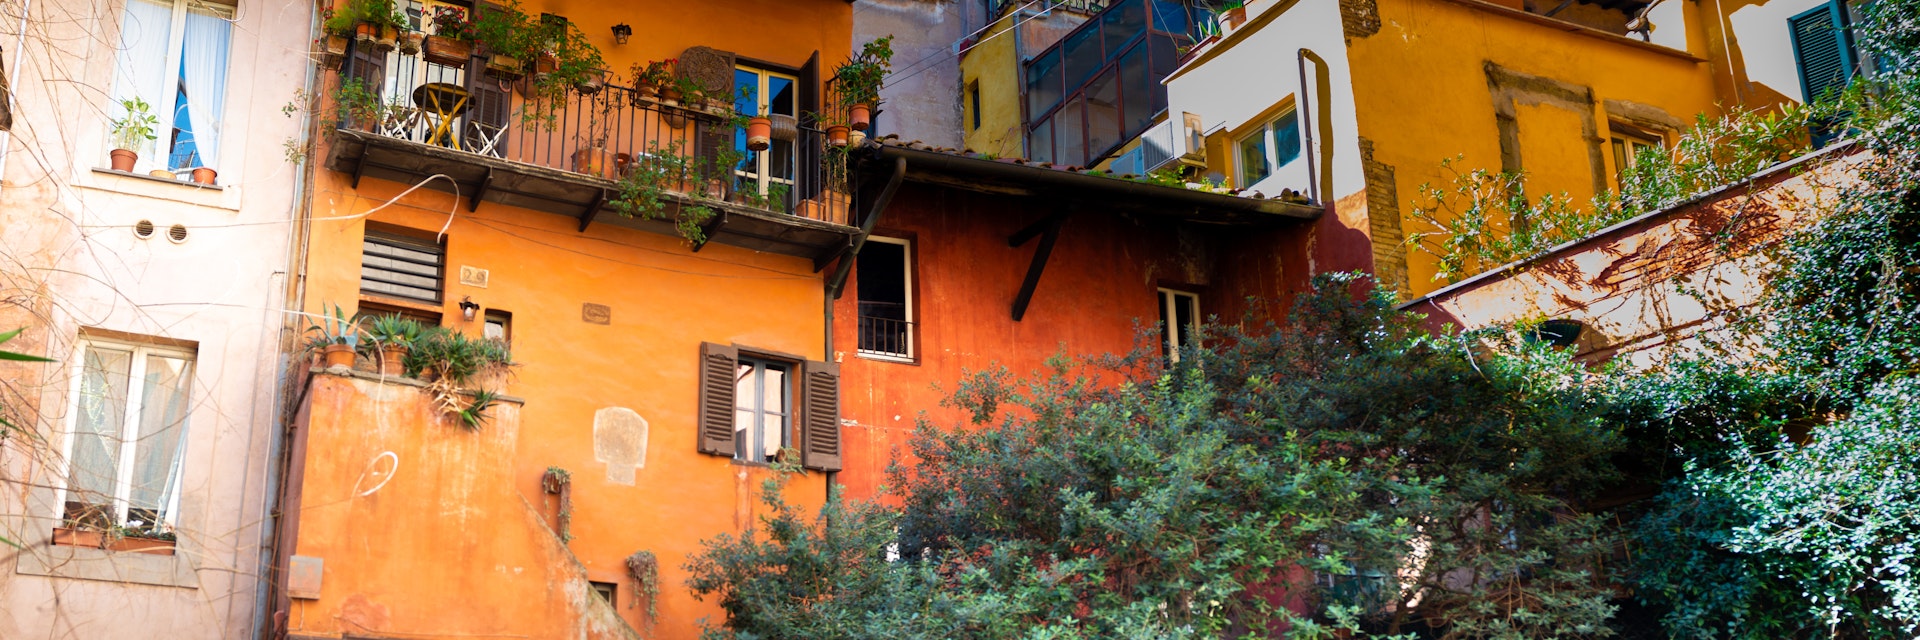 Small courtyard in Rome , with rustic ocher houses and vine trees.
1480158885